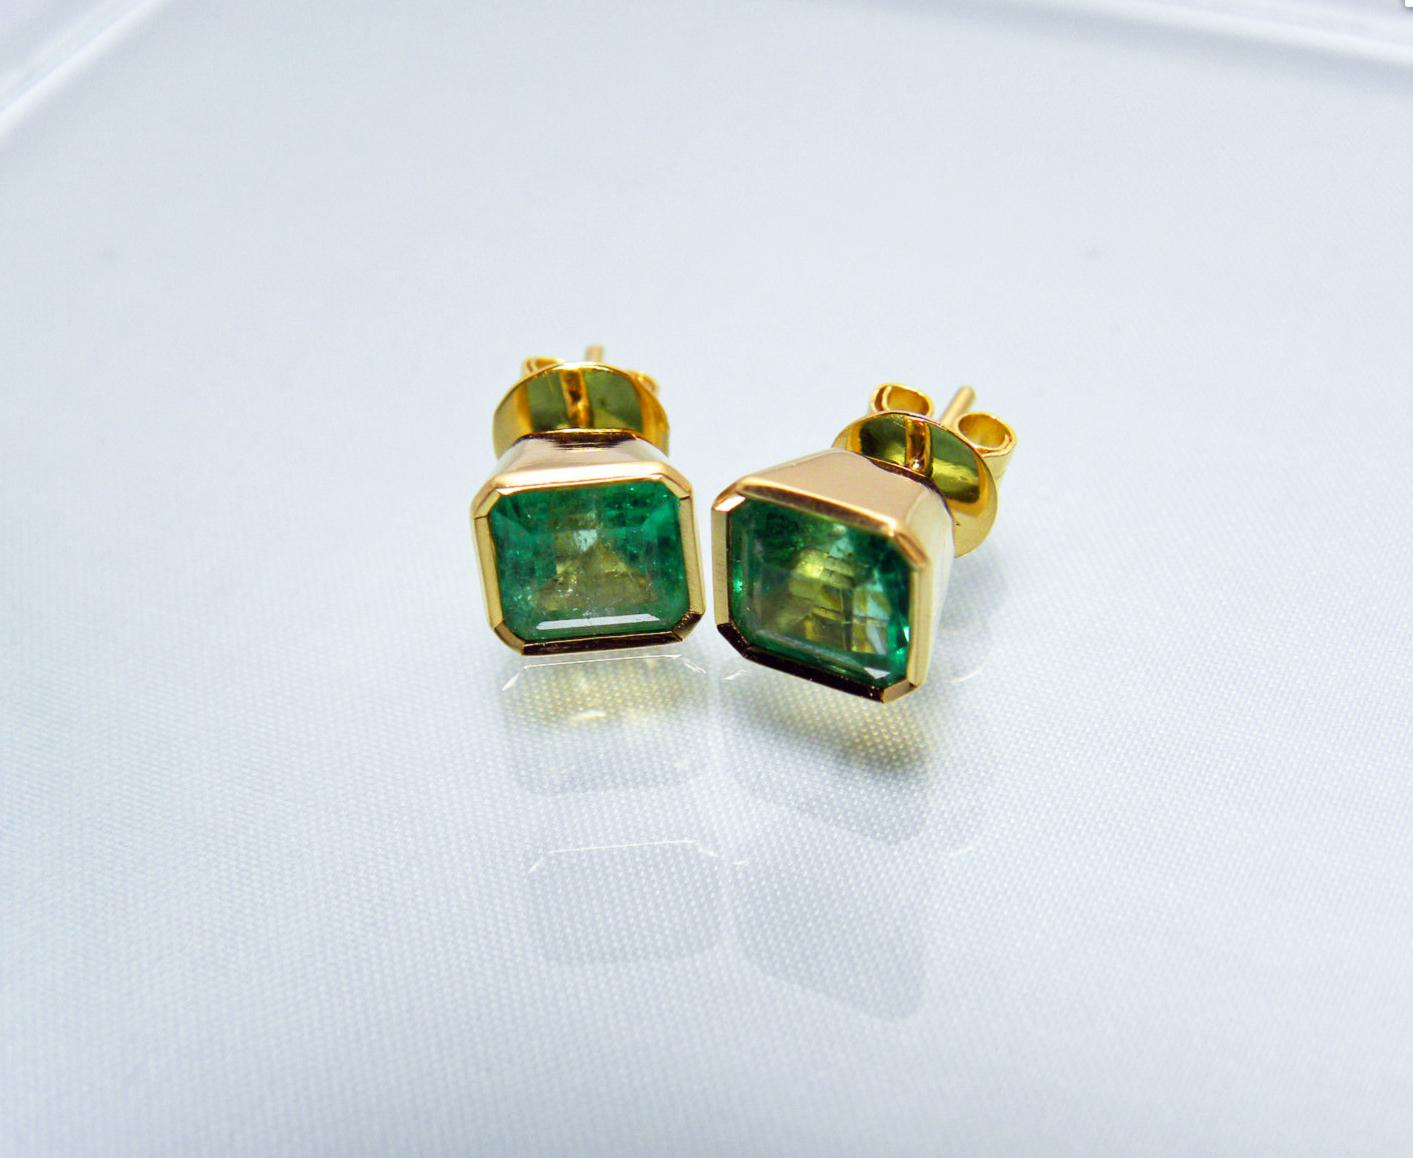 3.90 Carat Natural Green Colombian Emerald Stud Earrings 18k Gold 
Primary Stones: 100% Natural Colombian Emeralds
Shape or Cut : Emerald Cut
Average Color/Clarity : AAA Medium Green Color/ Clarity, VS
Total Weight Emeralds: 3.90 Carats 
Second